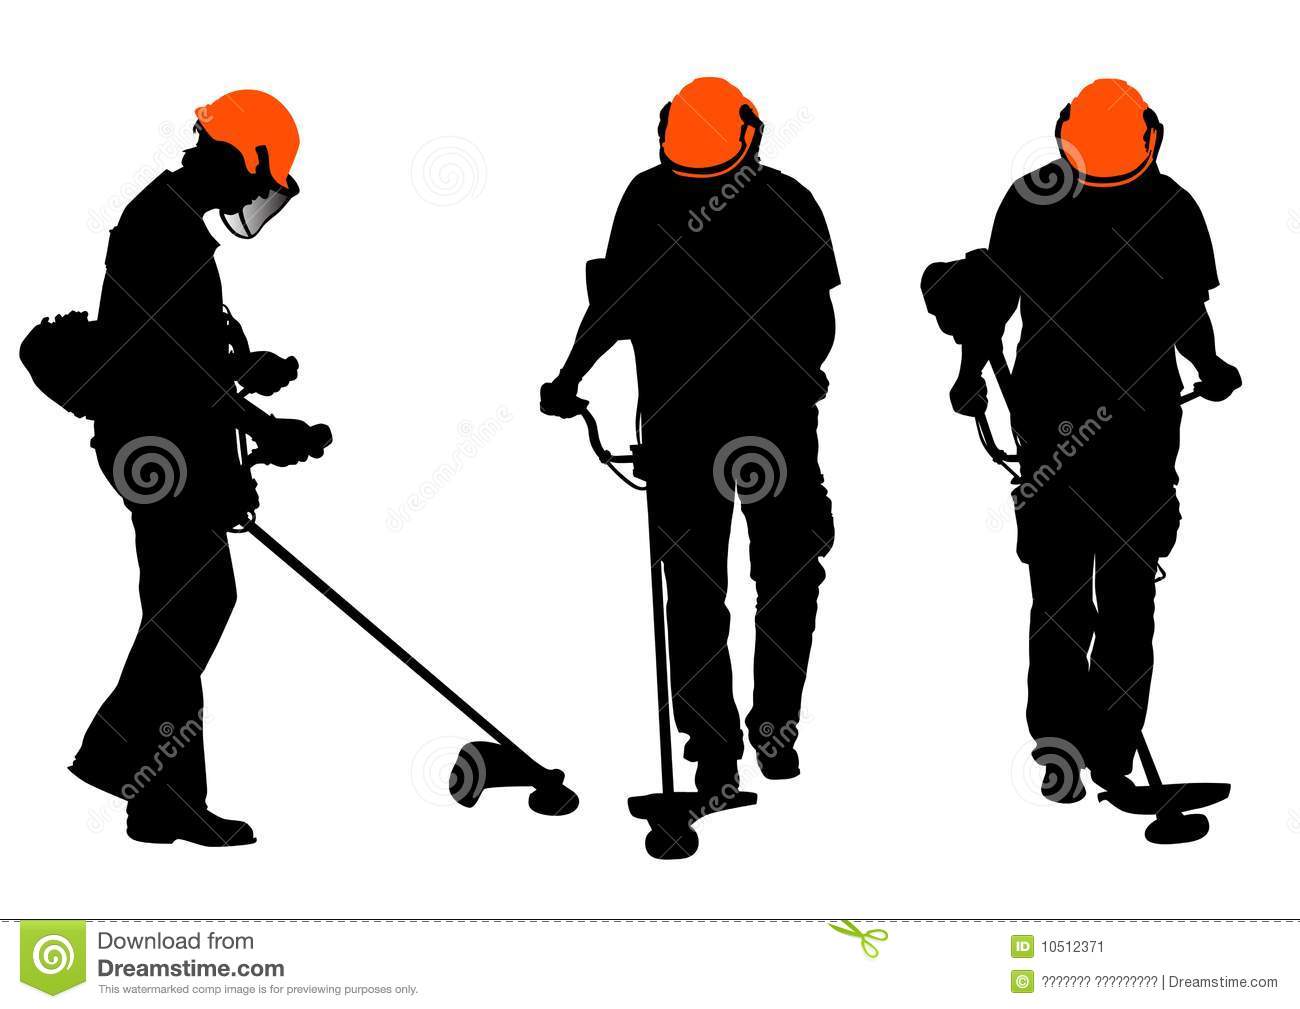 Lawn Care Silhouette Clipart   Free Clip Art Images